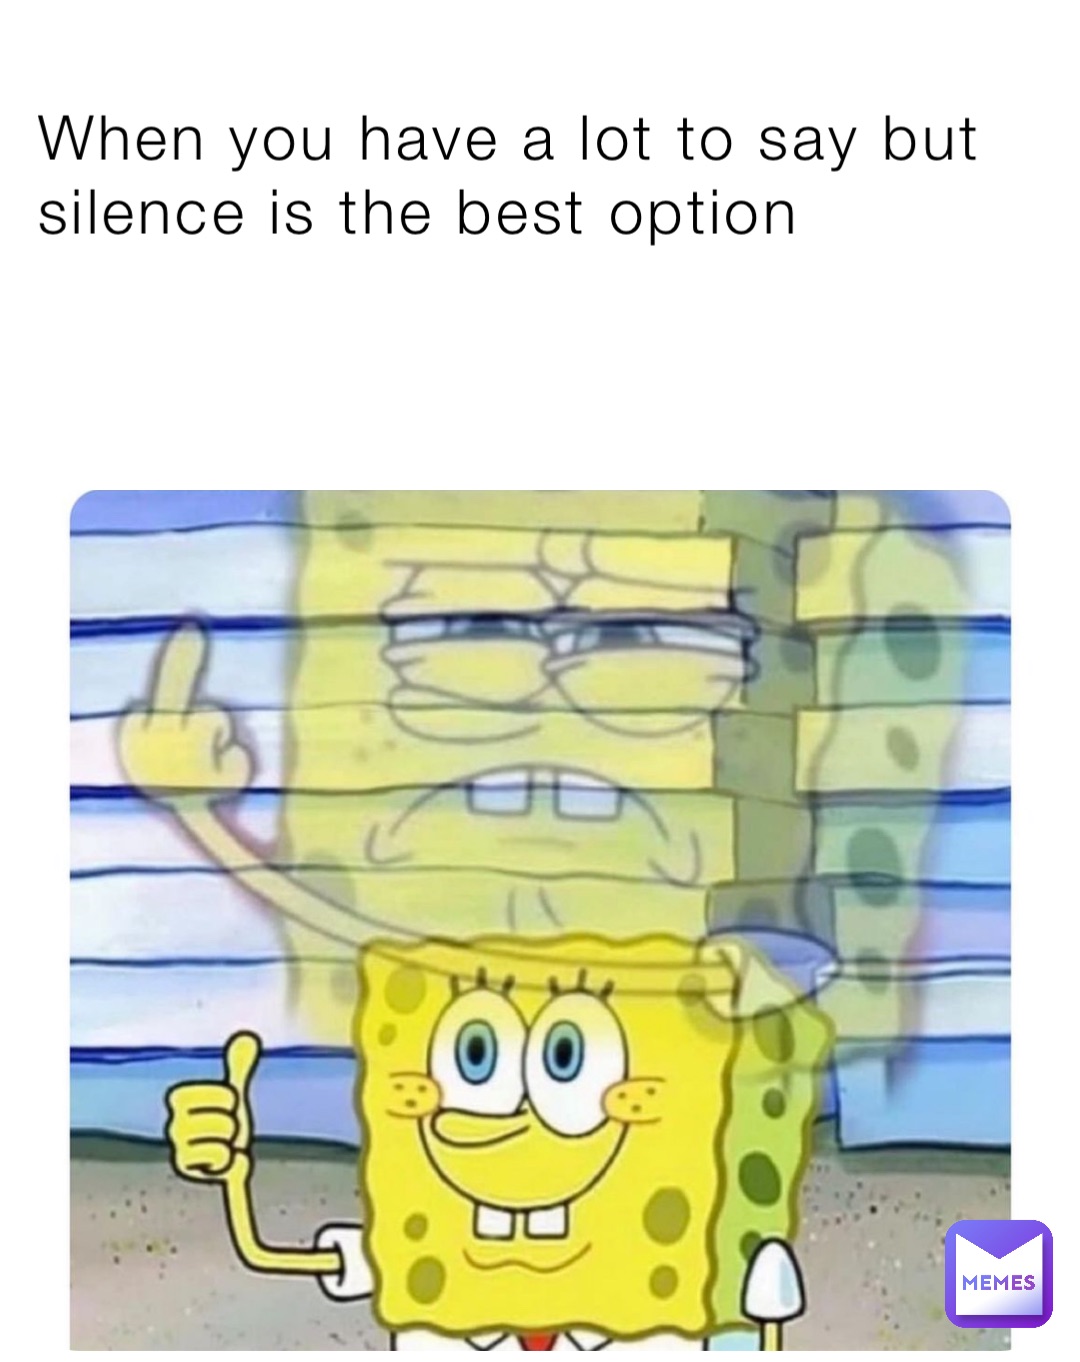 When you have a lot to say but silence is the best option